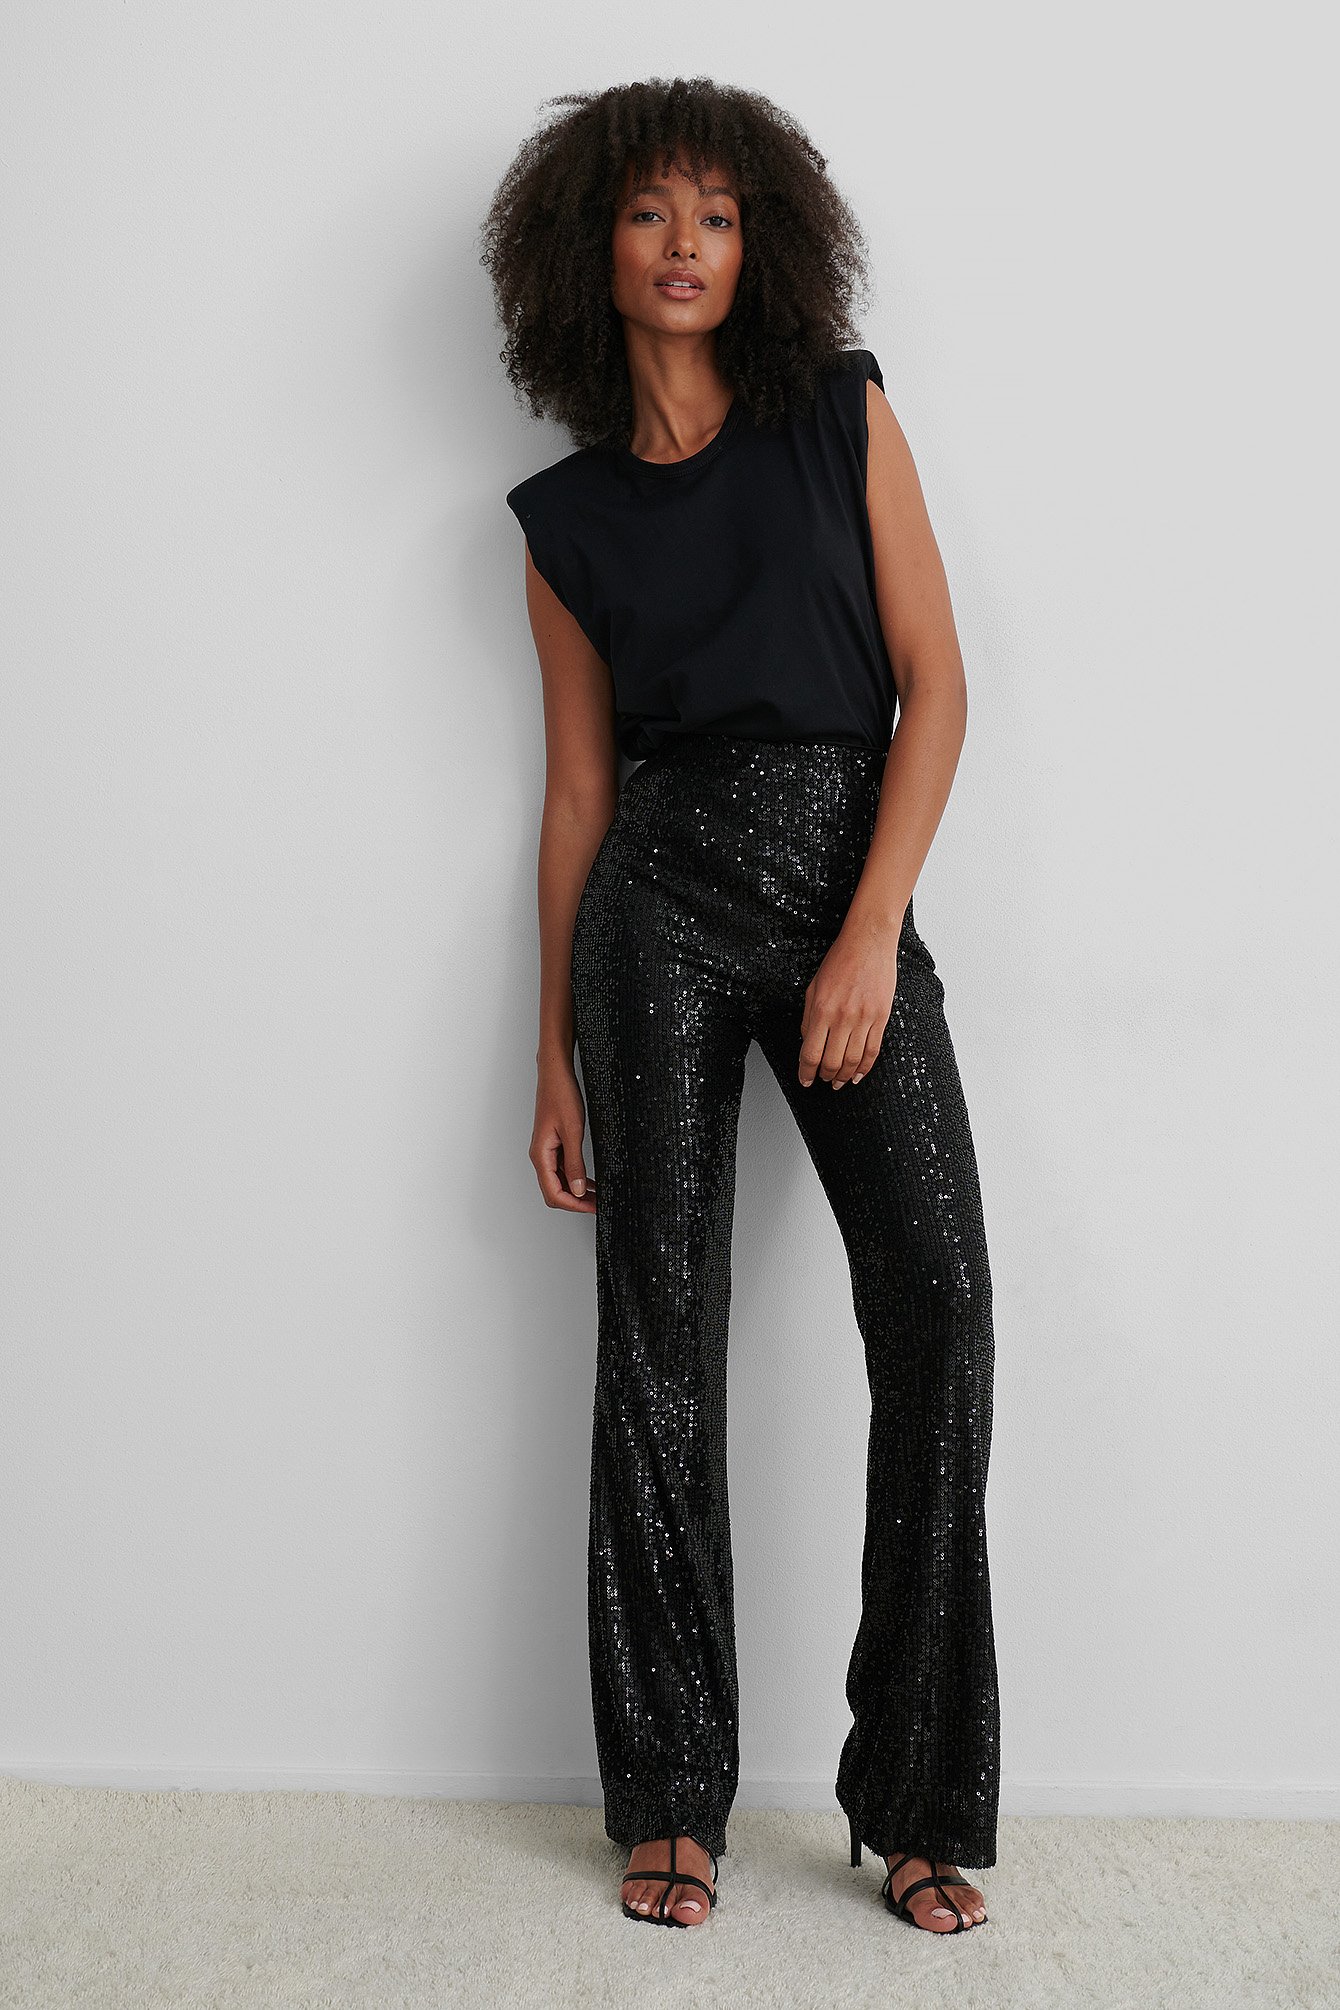 How To Style Black Sequin Pants | tunersread.com